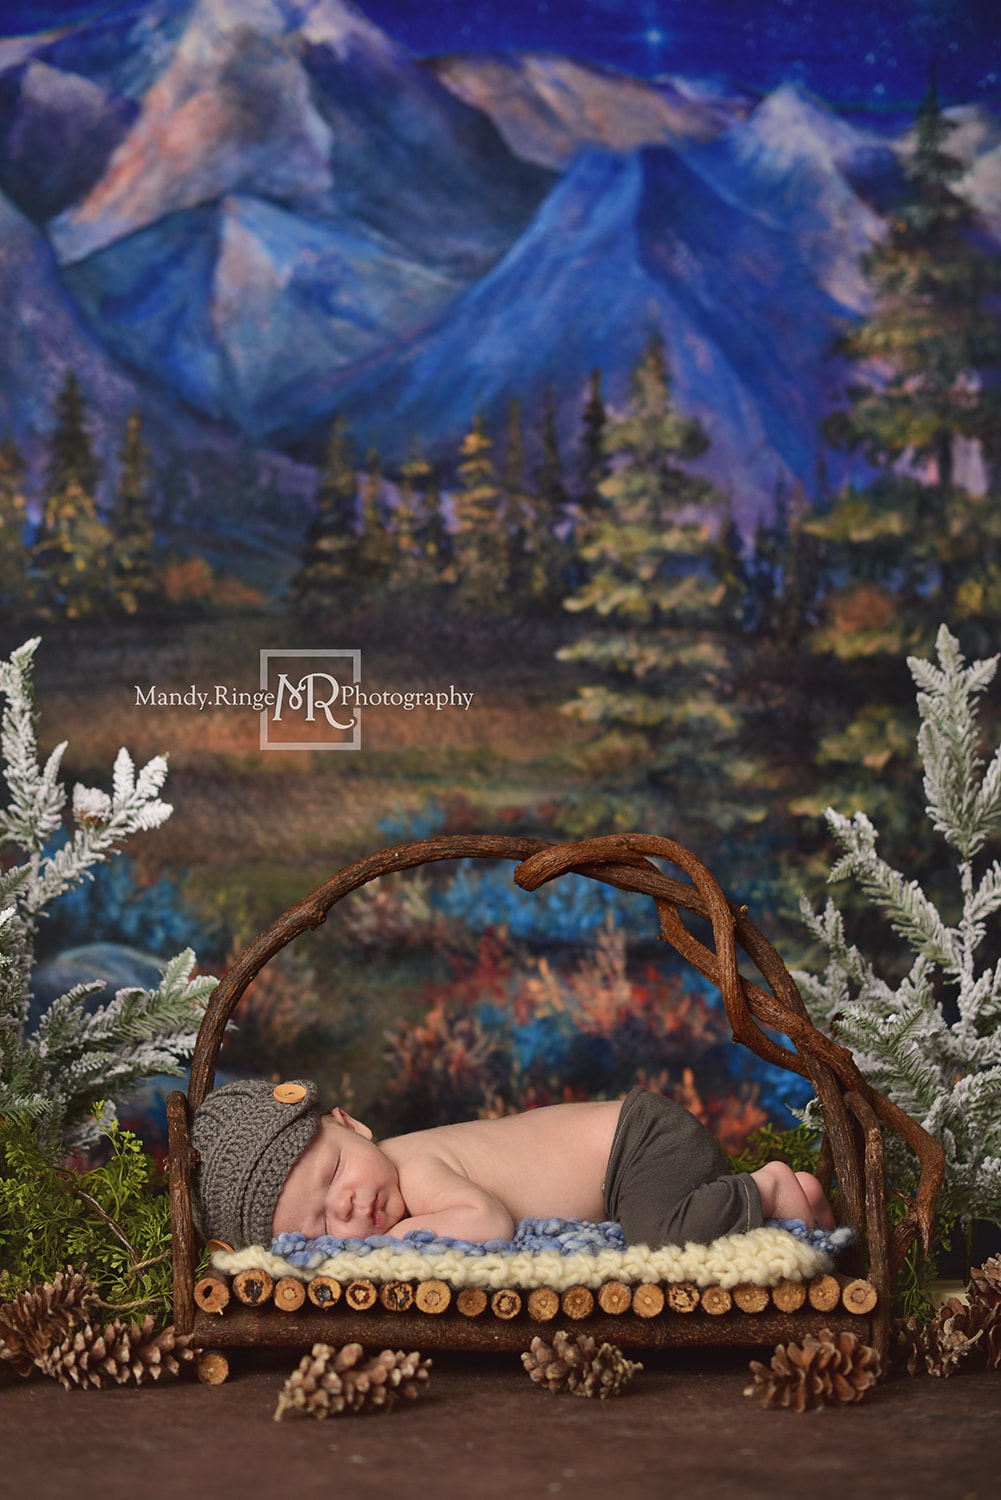 Newborn boy portraits // Fake pine trees, pinecones, twig bed, Under the Stars from Baby Dream Backdrops, Dirt Floordrop, Intuitions Backgrounds // St. Charles, IL studio // by Mandy Ringe Photography